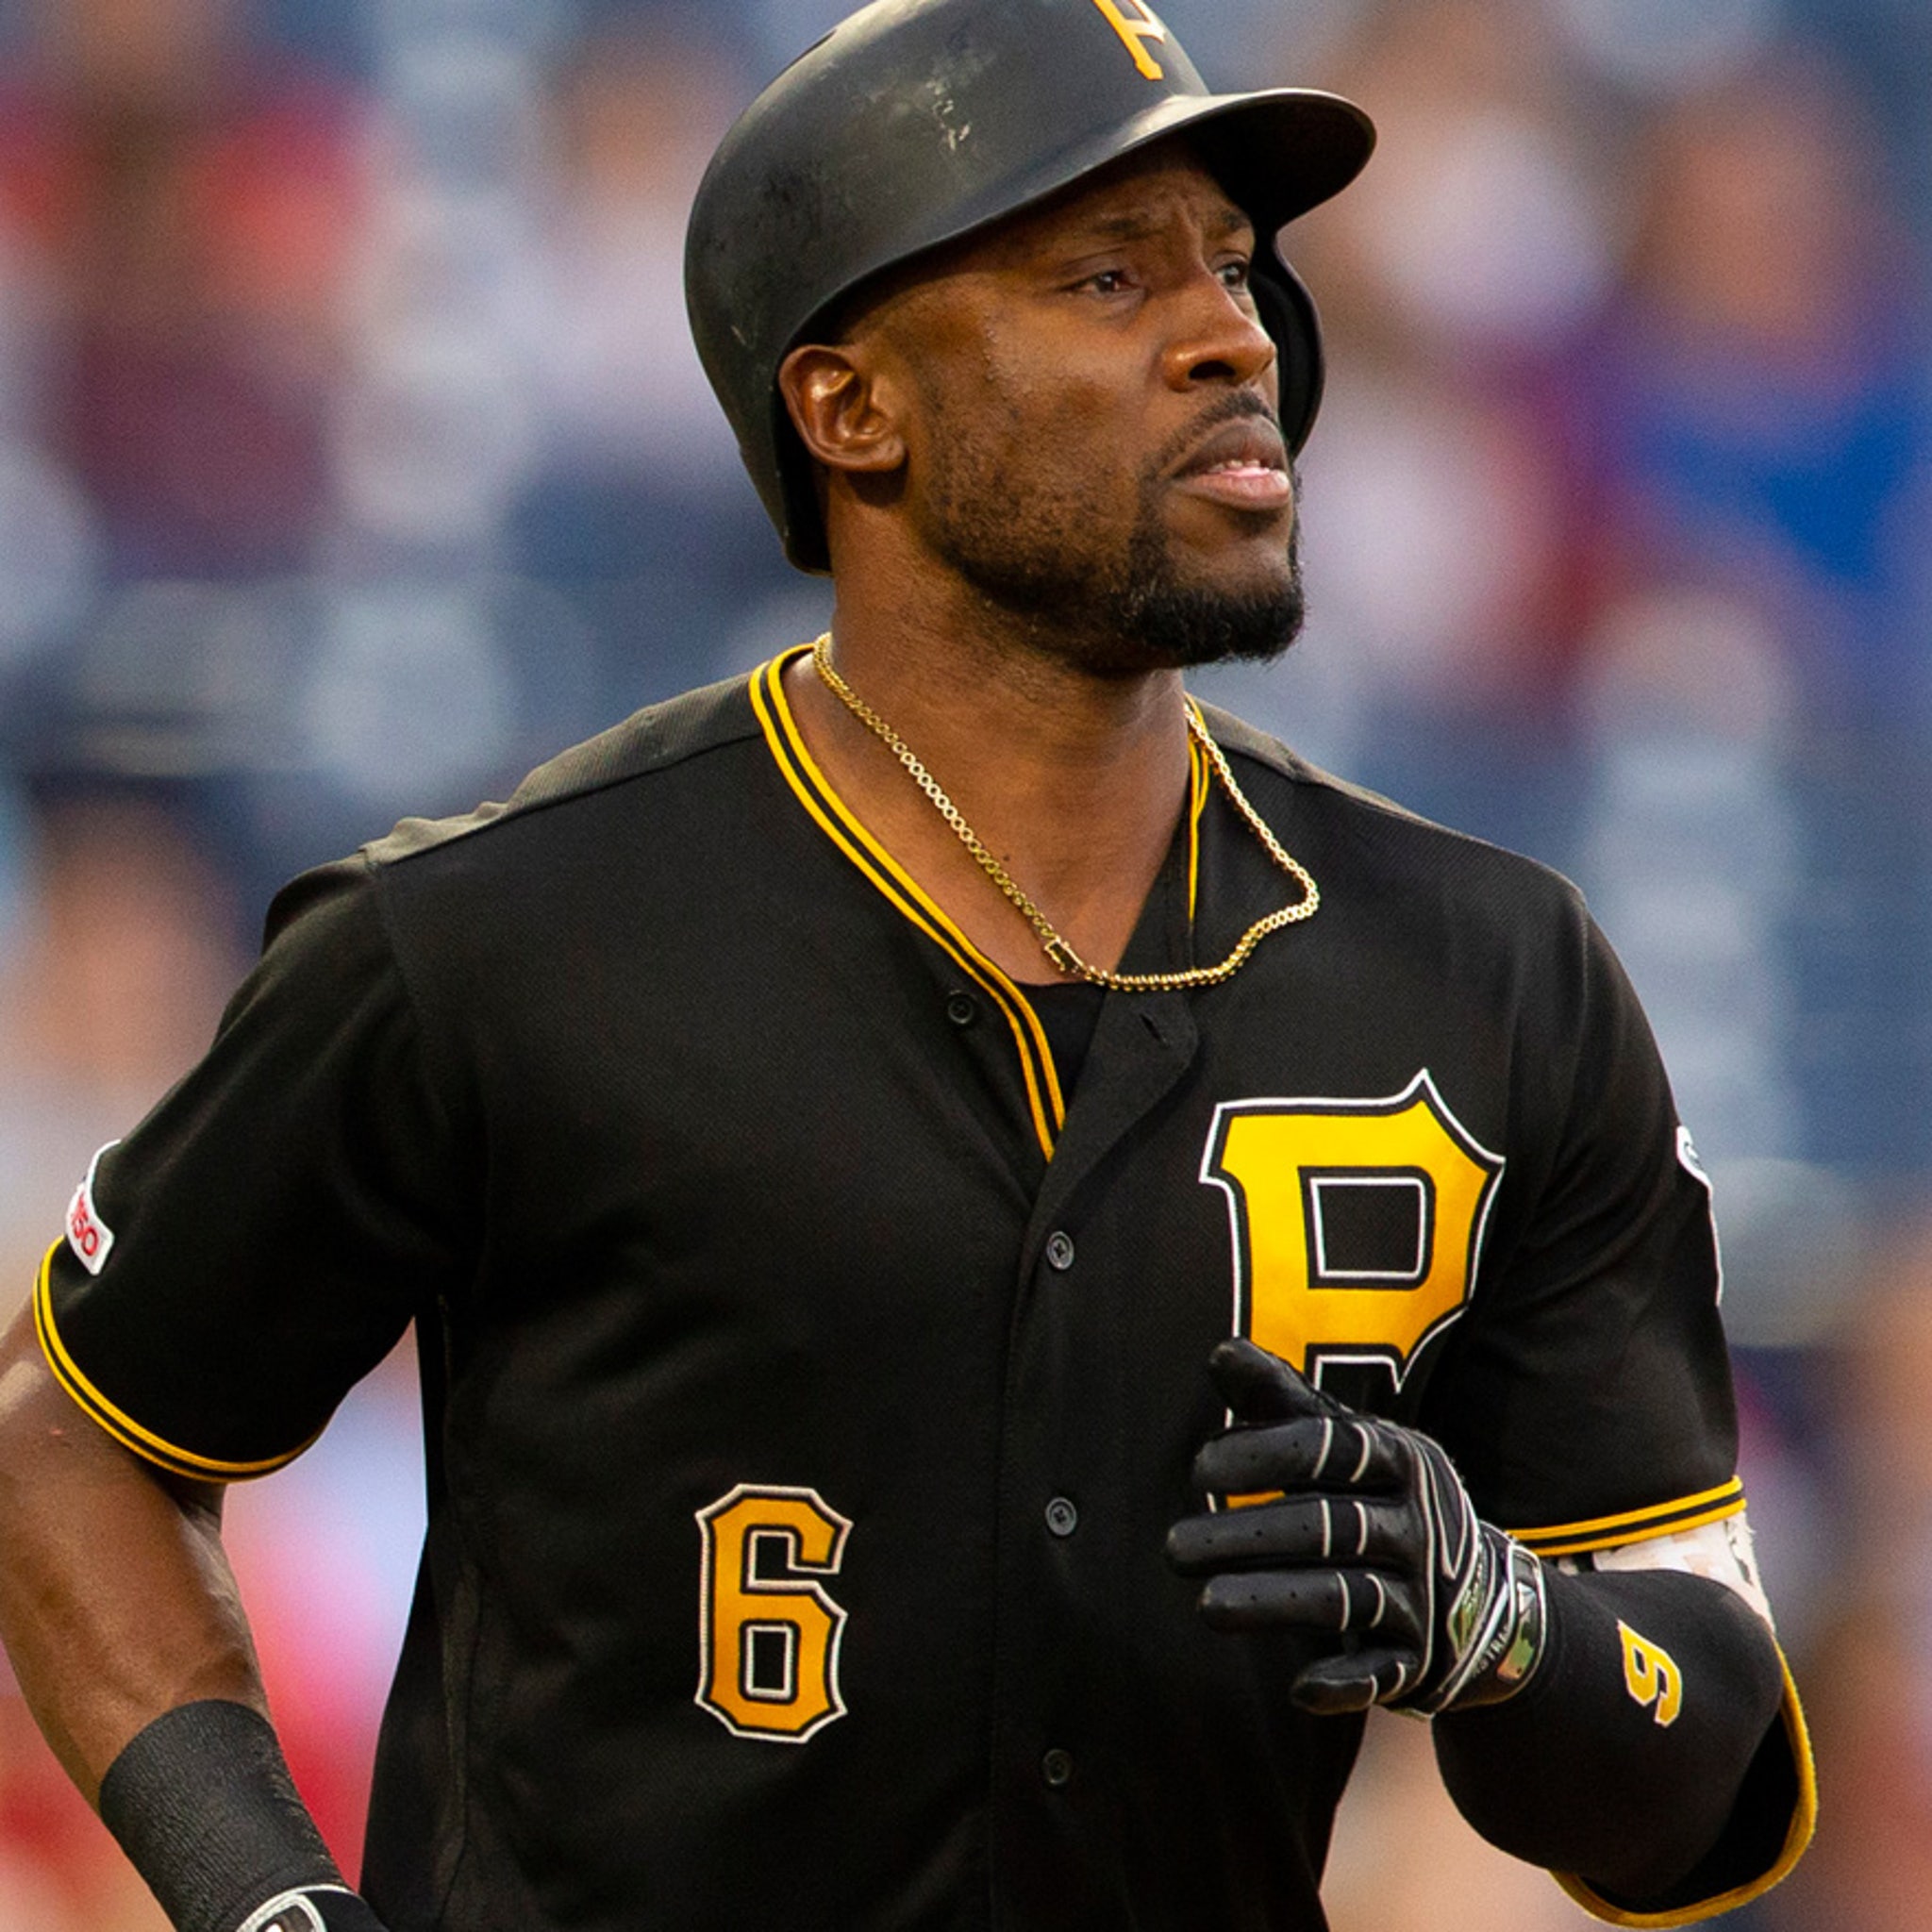 Mets' Marte loses grandmother 2 years after wife's death – KGET 17